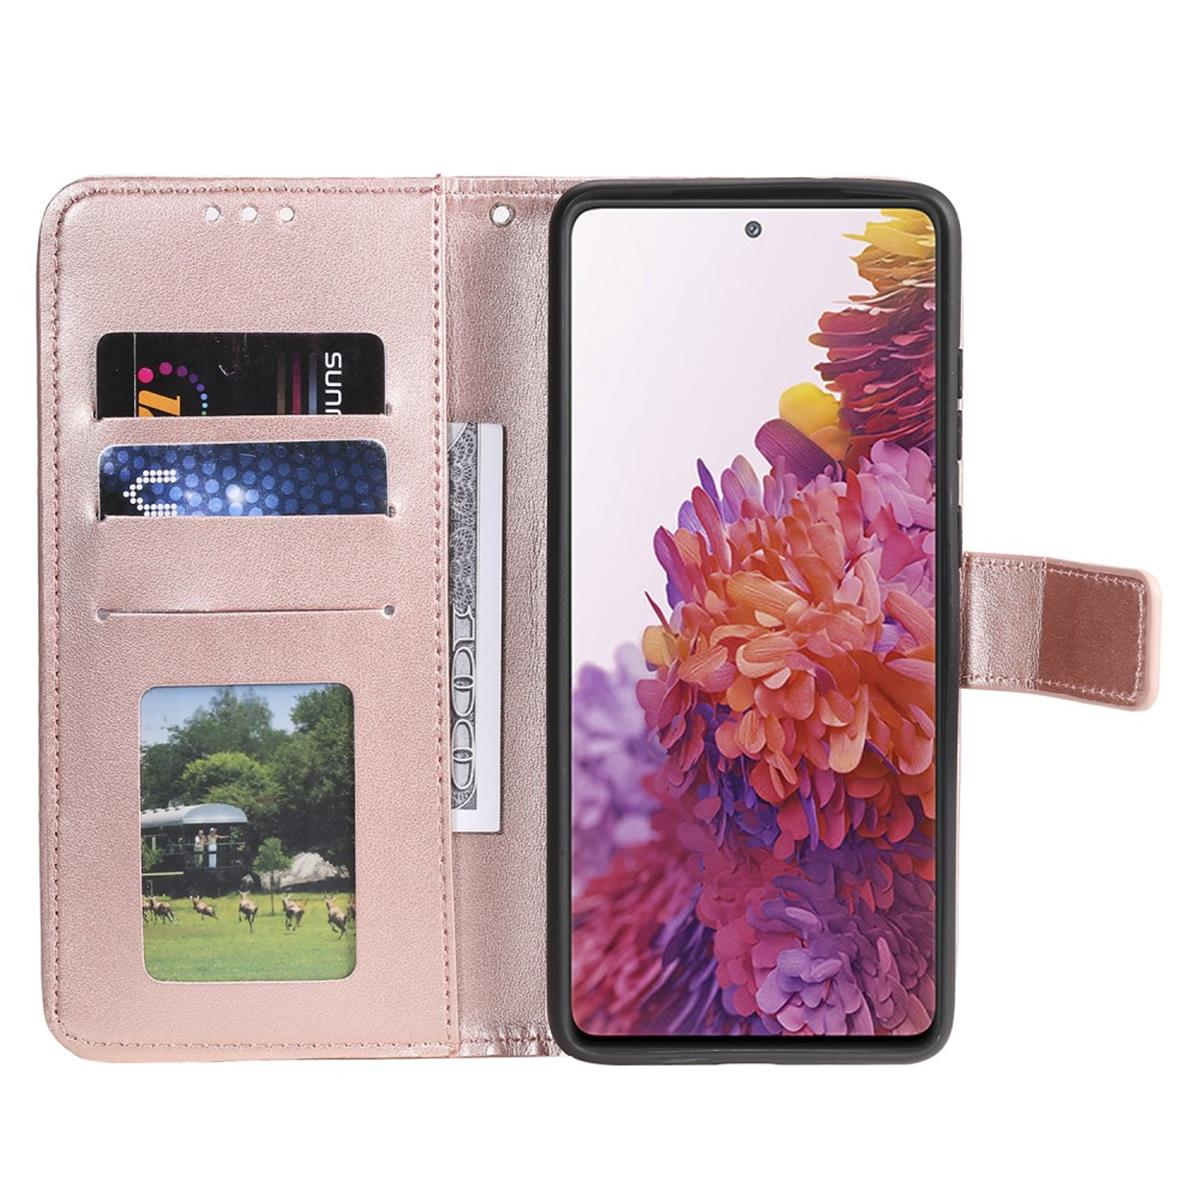 COVERKINGZ Klapphülle mit Mandala Muster, S20 Samsung, Galaxy FE, Roségold Bookcover